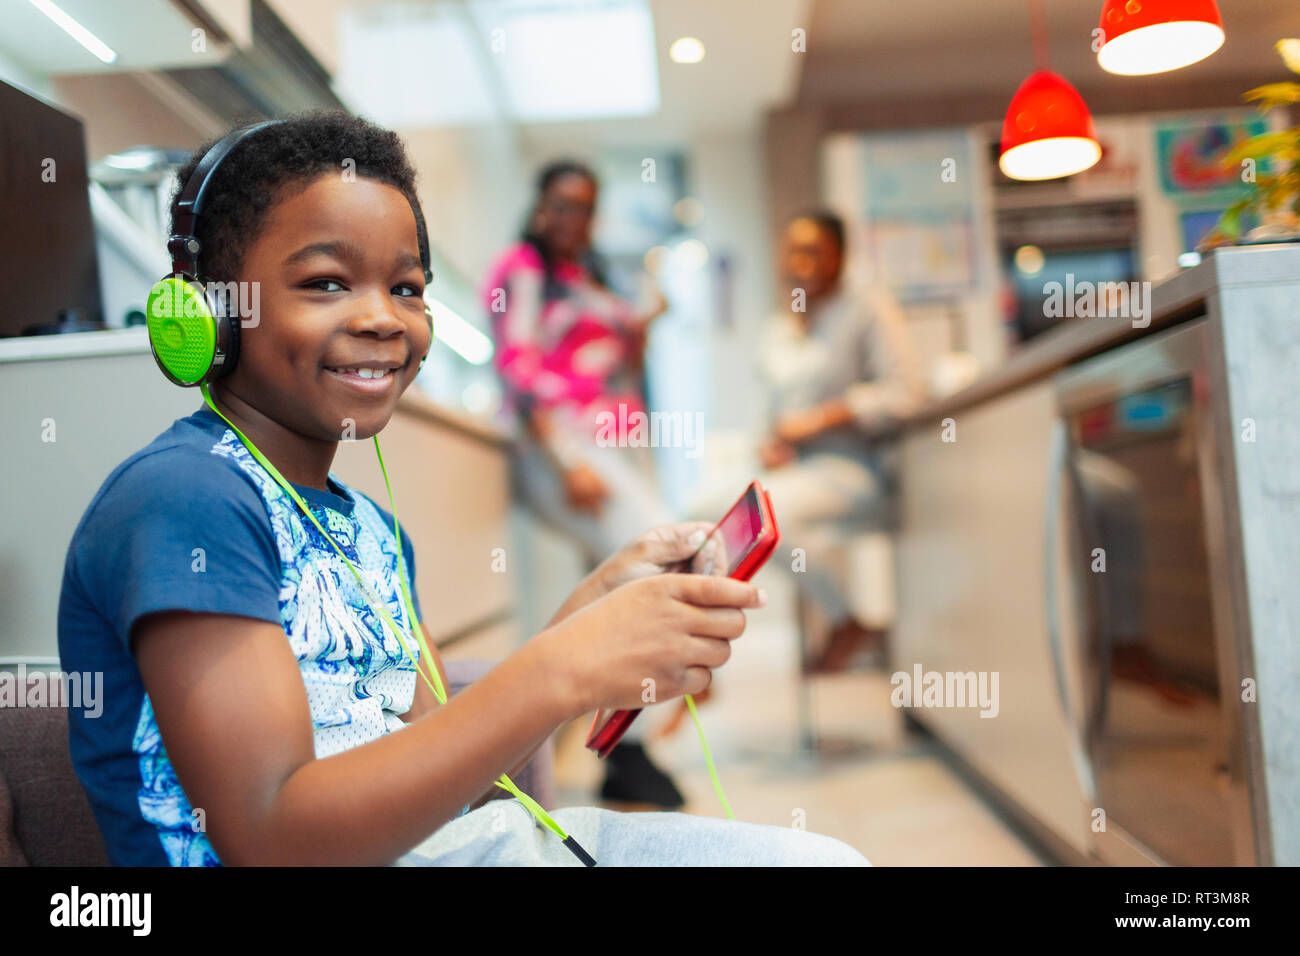 Portrait smiling, confident boy playing video game with headphones and digital tablet Stock Photo